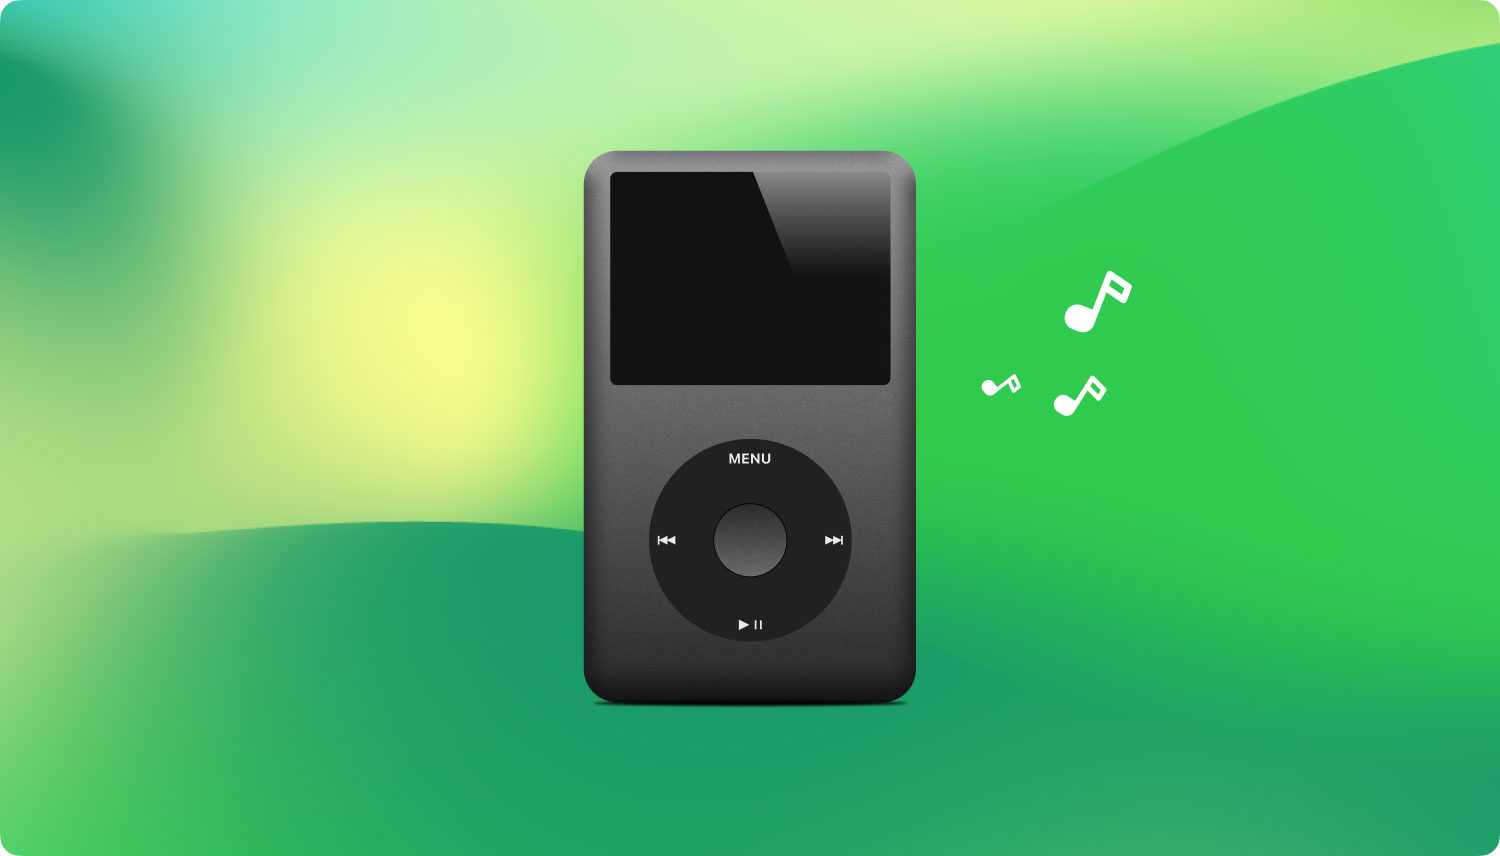 Your iPod Classic Can Still Compete With the iPhone Music App